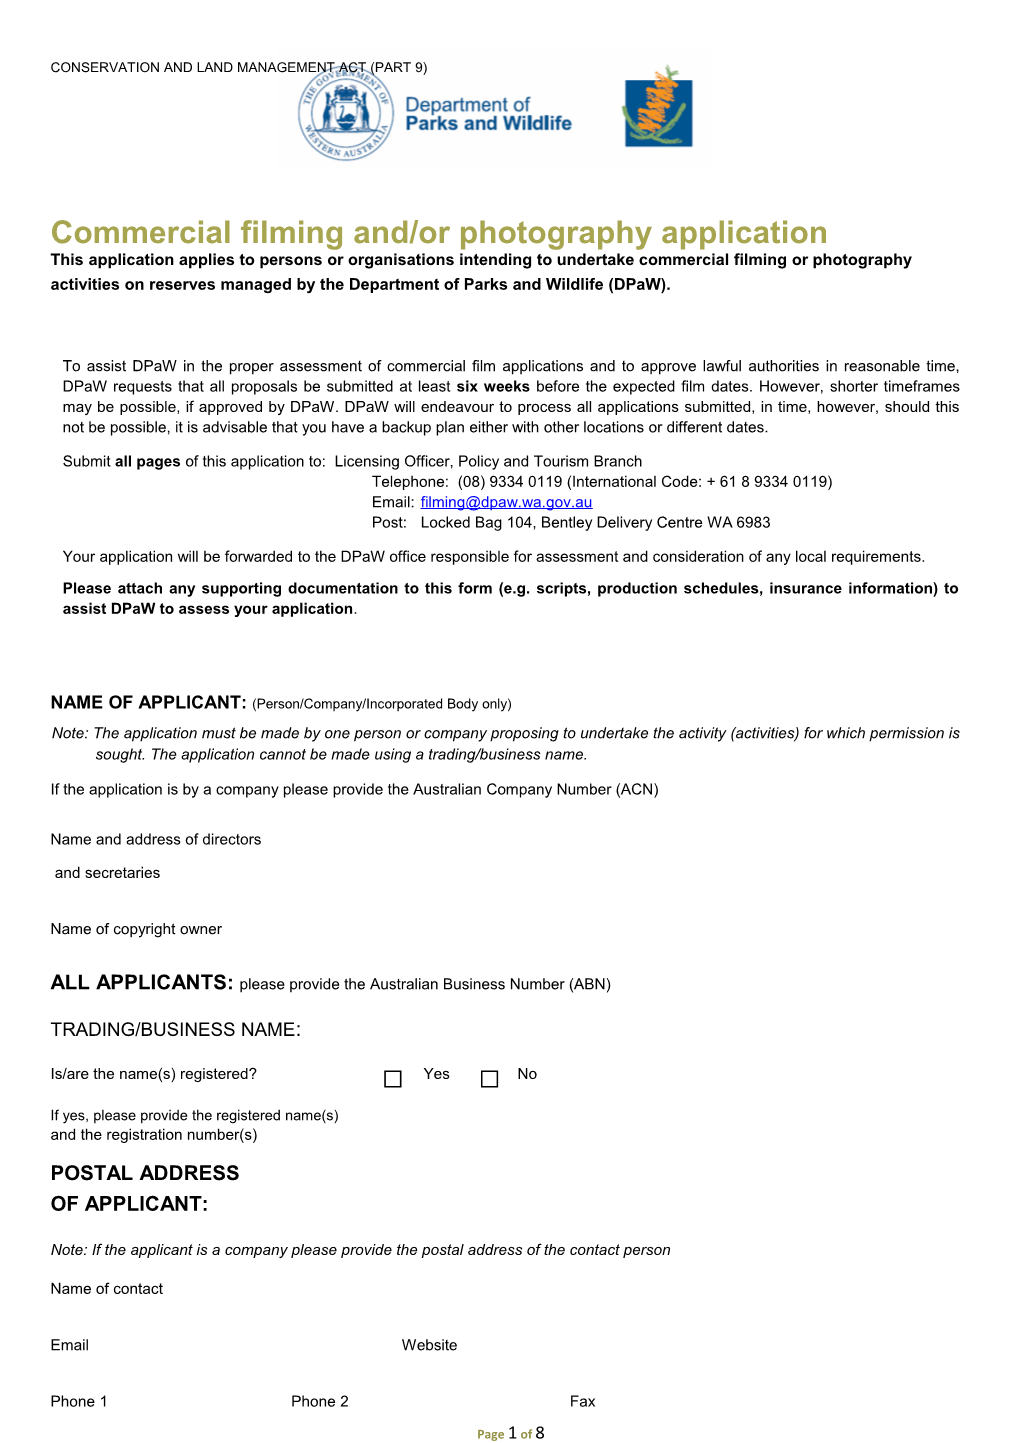 Commercial Filming And/Or Photography Application